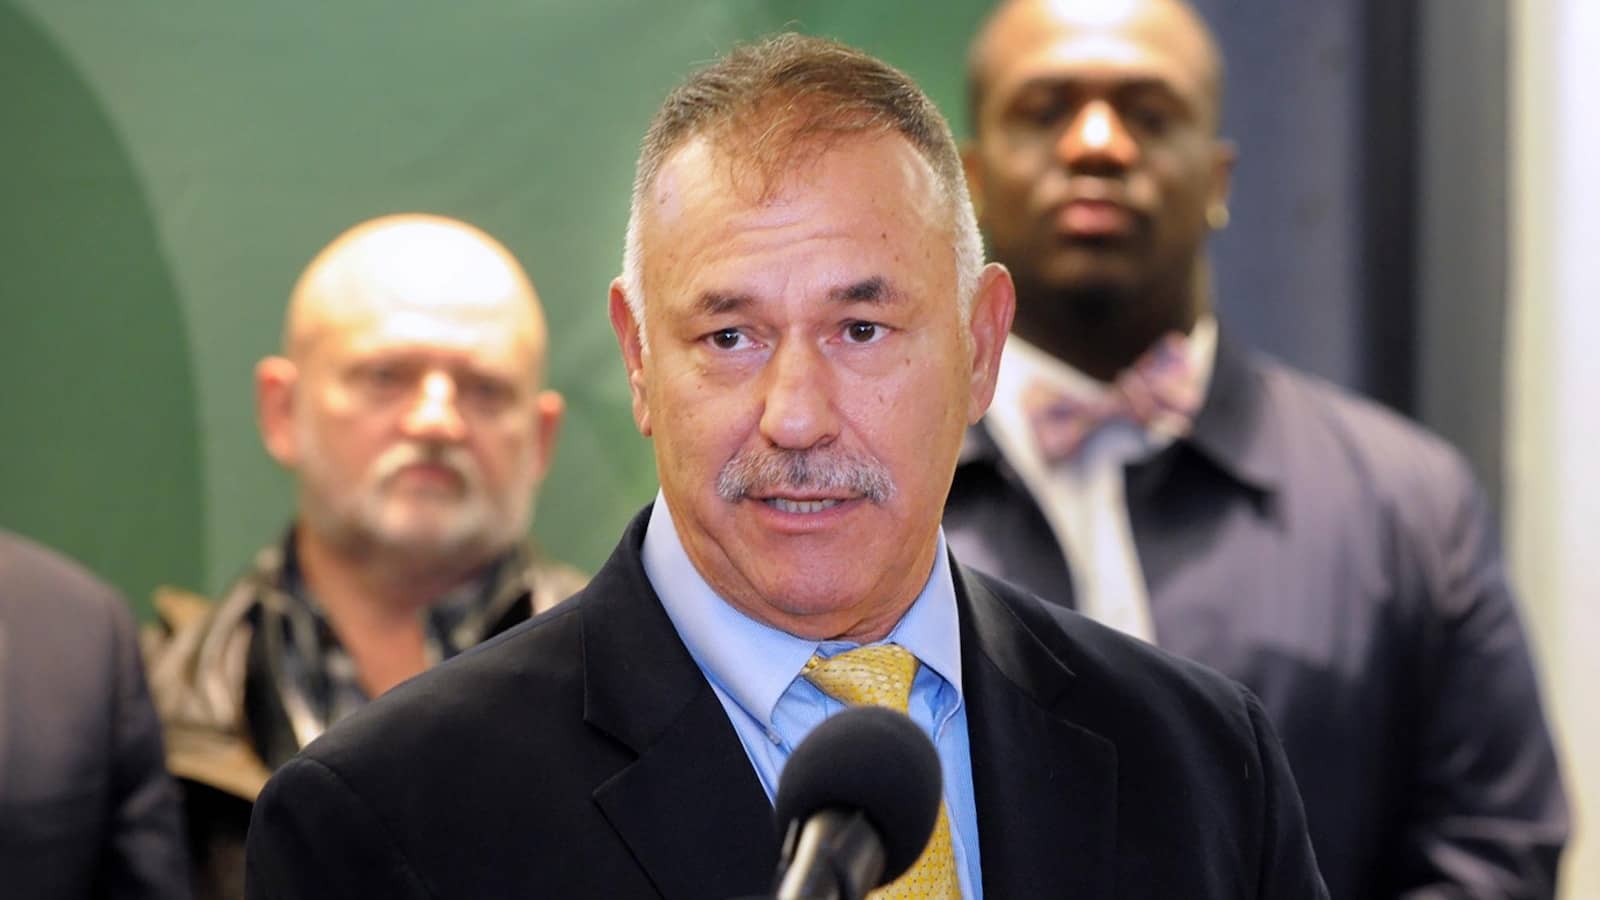 Former Connecticut budget official arrested, pleads not guilty to bribery and extortion charges